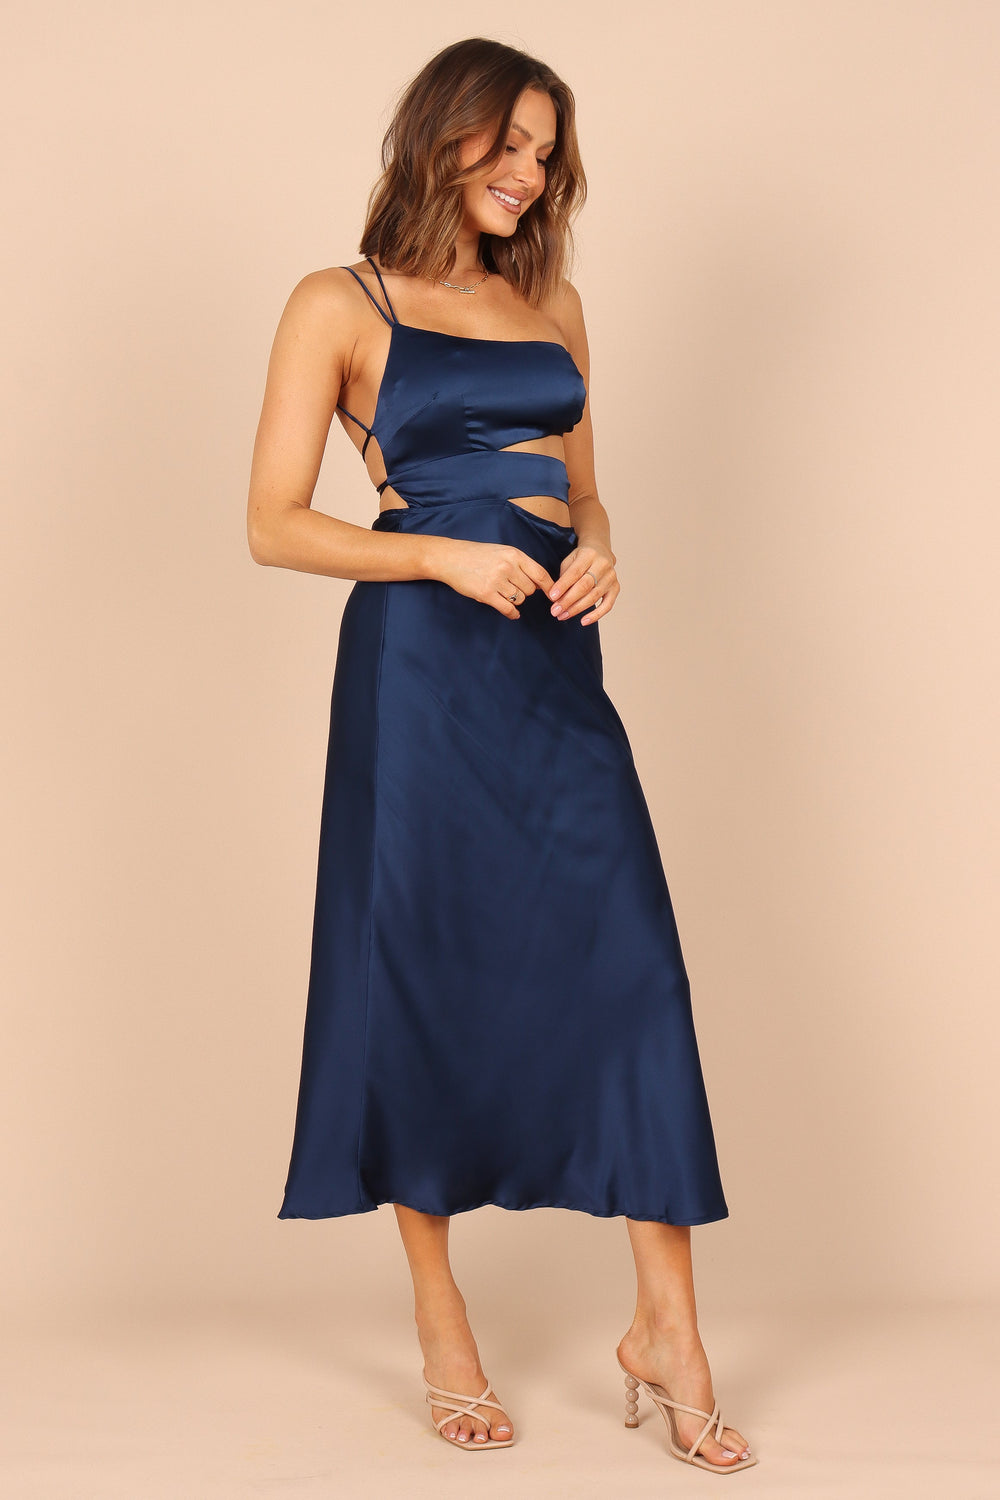 Forelle One Shoulder Cut Out Midi Dress - Navy - Petal & Pup USA